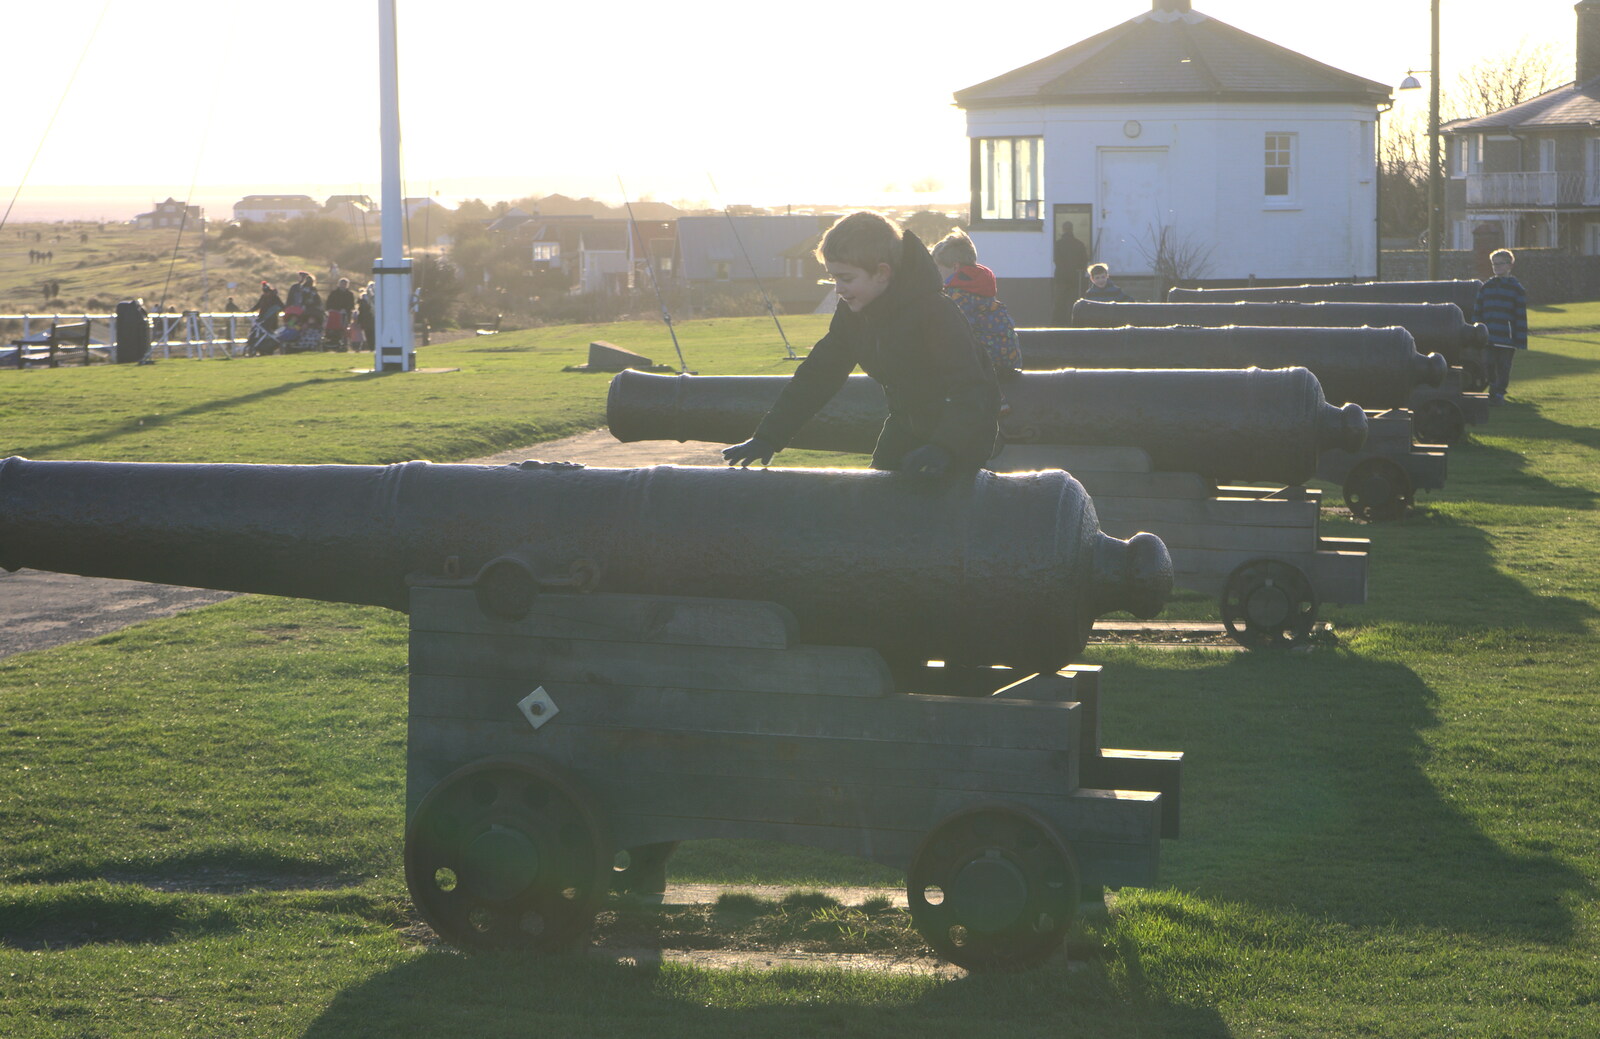 Fred on the cannons from Boxing Day in Southwold, Suffolk - 26th December 2016